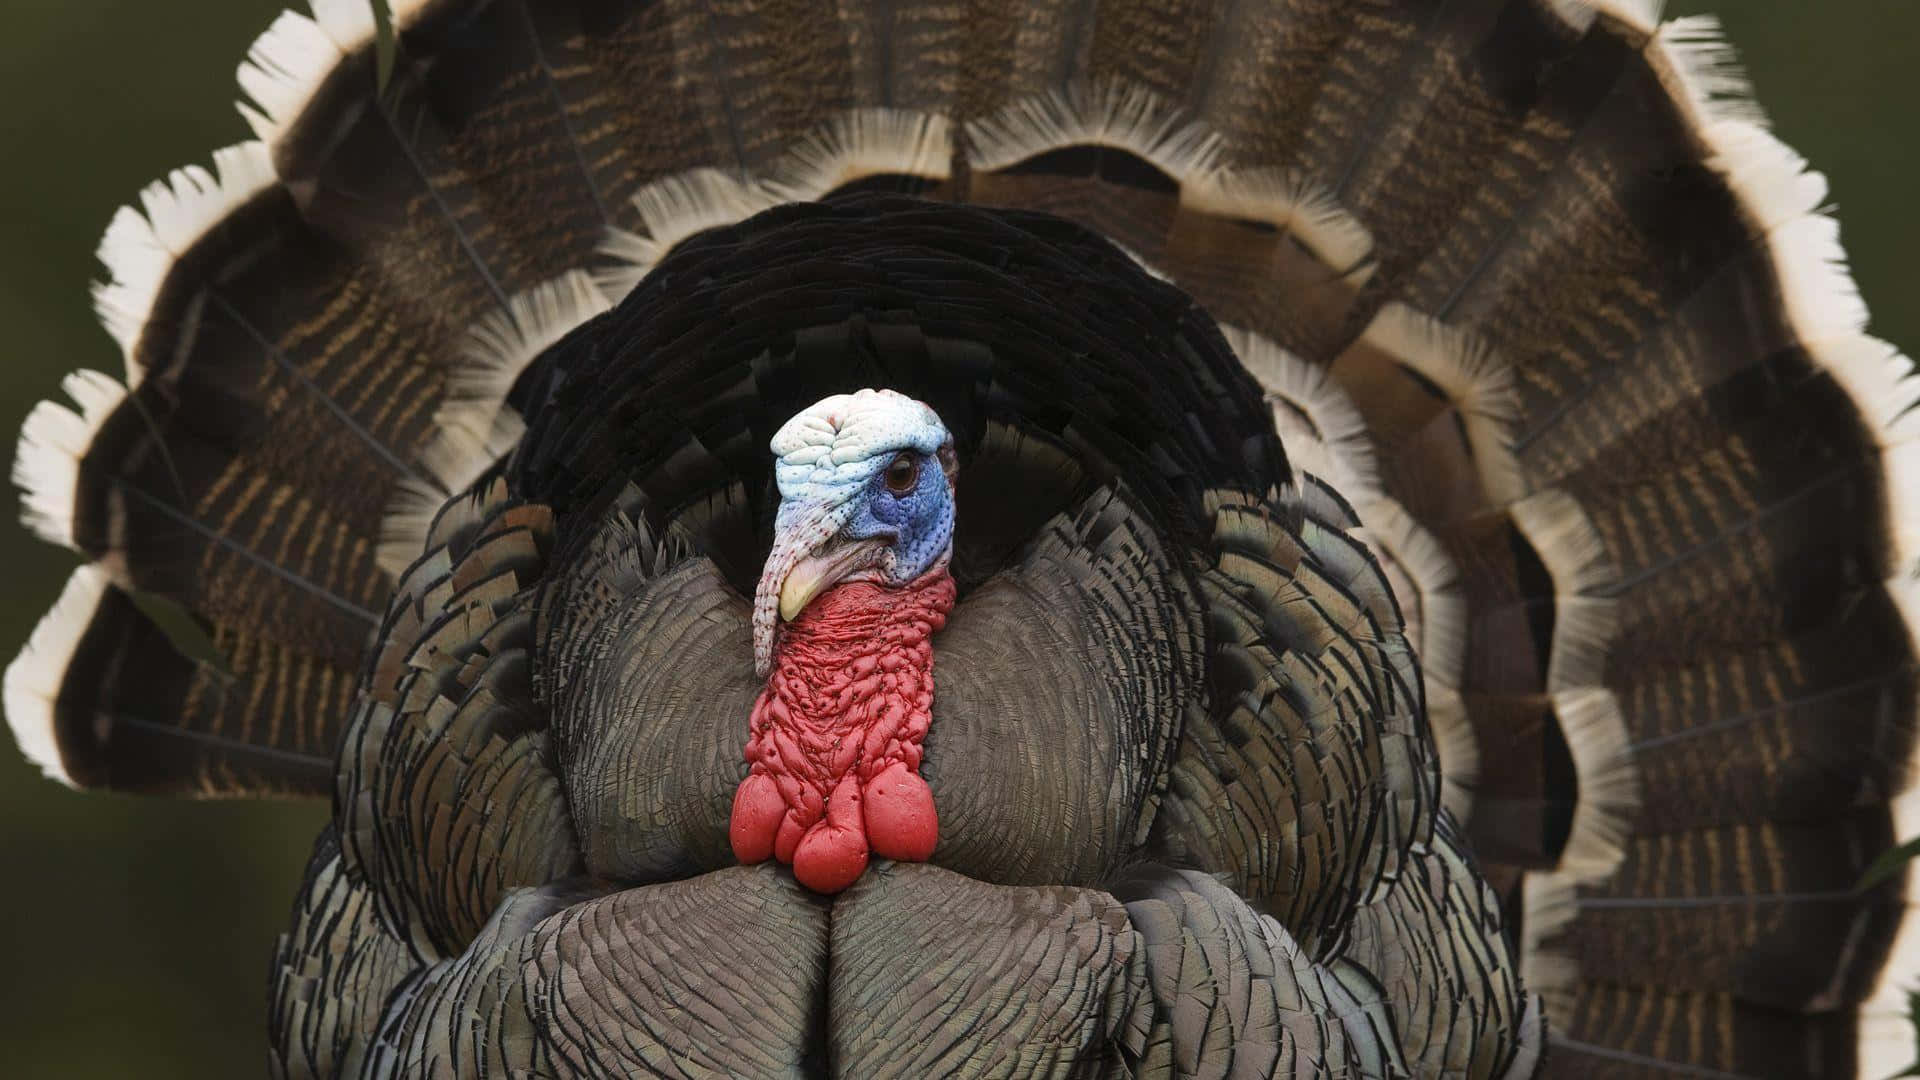 Experience freedom and the wild outdoors with Wild Turkey